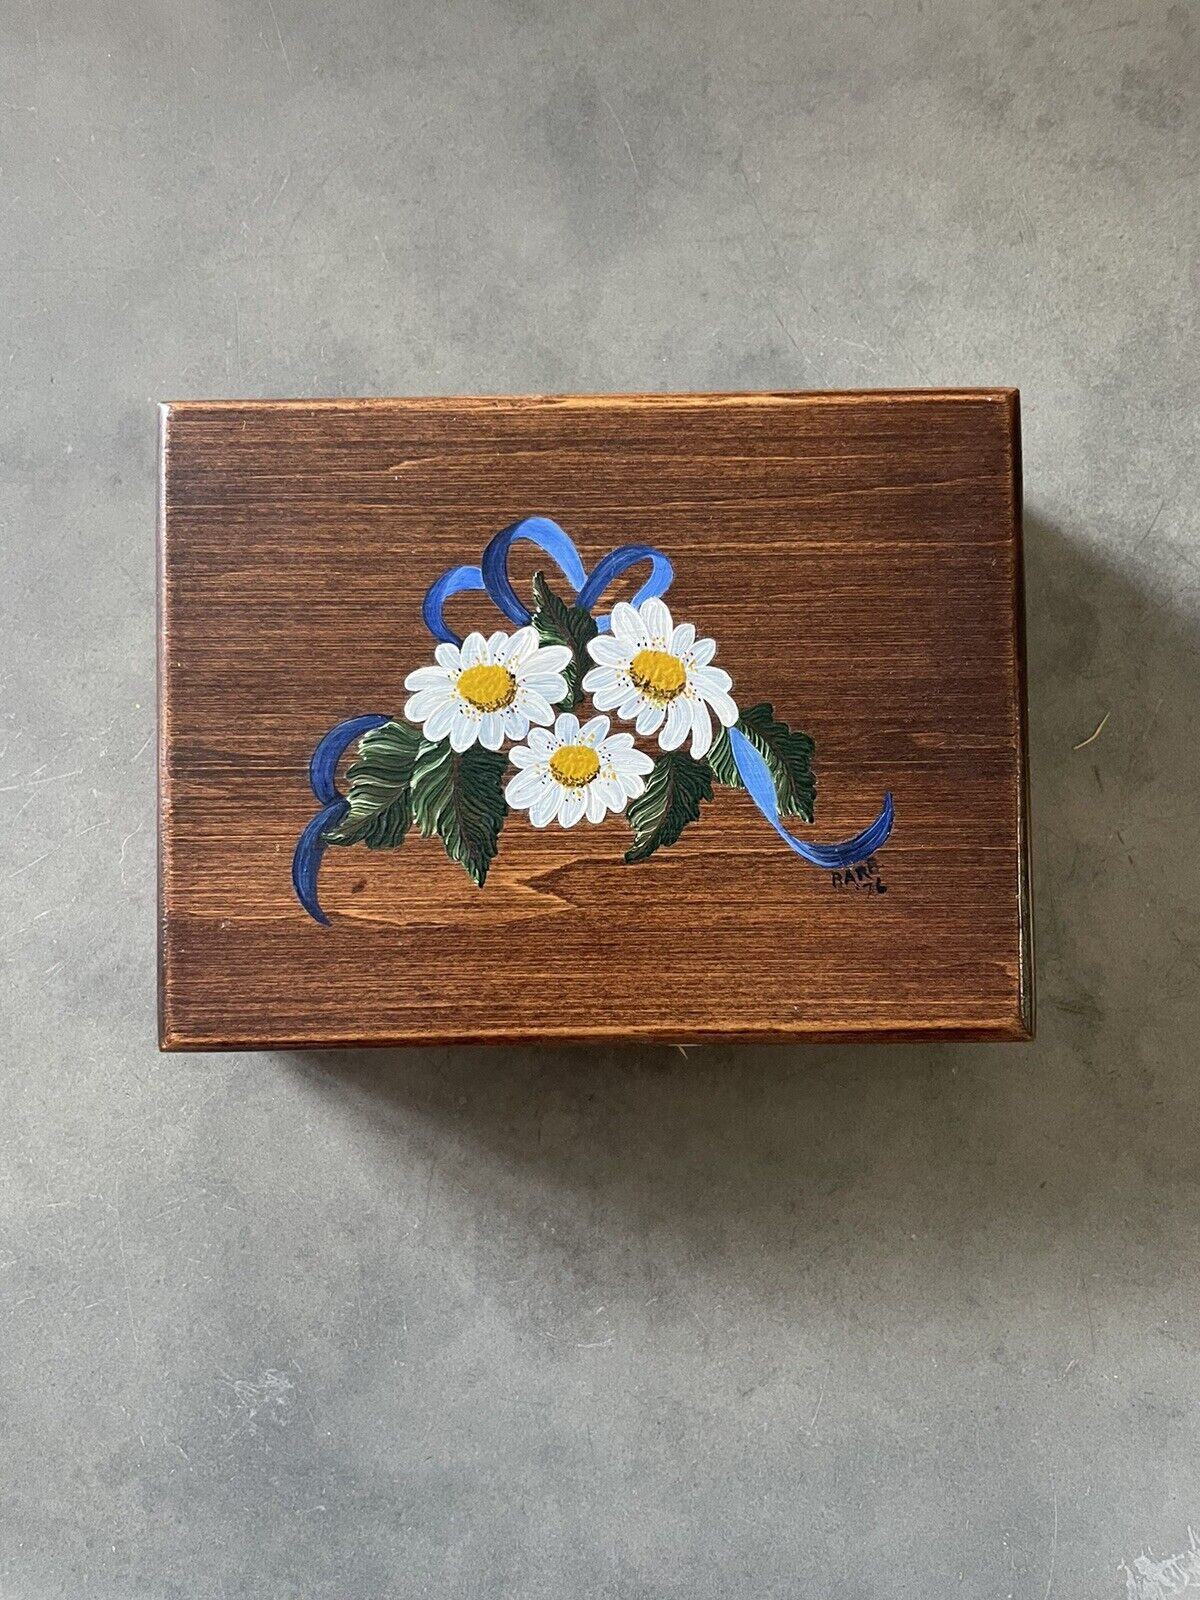 1976 Hand painted wooden Jewelry Box